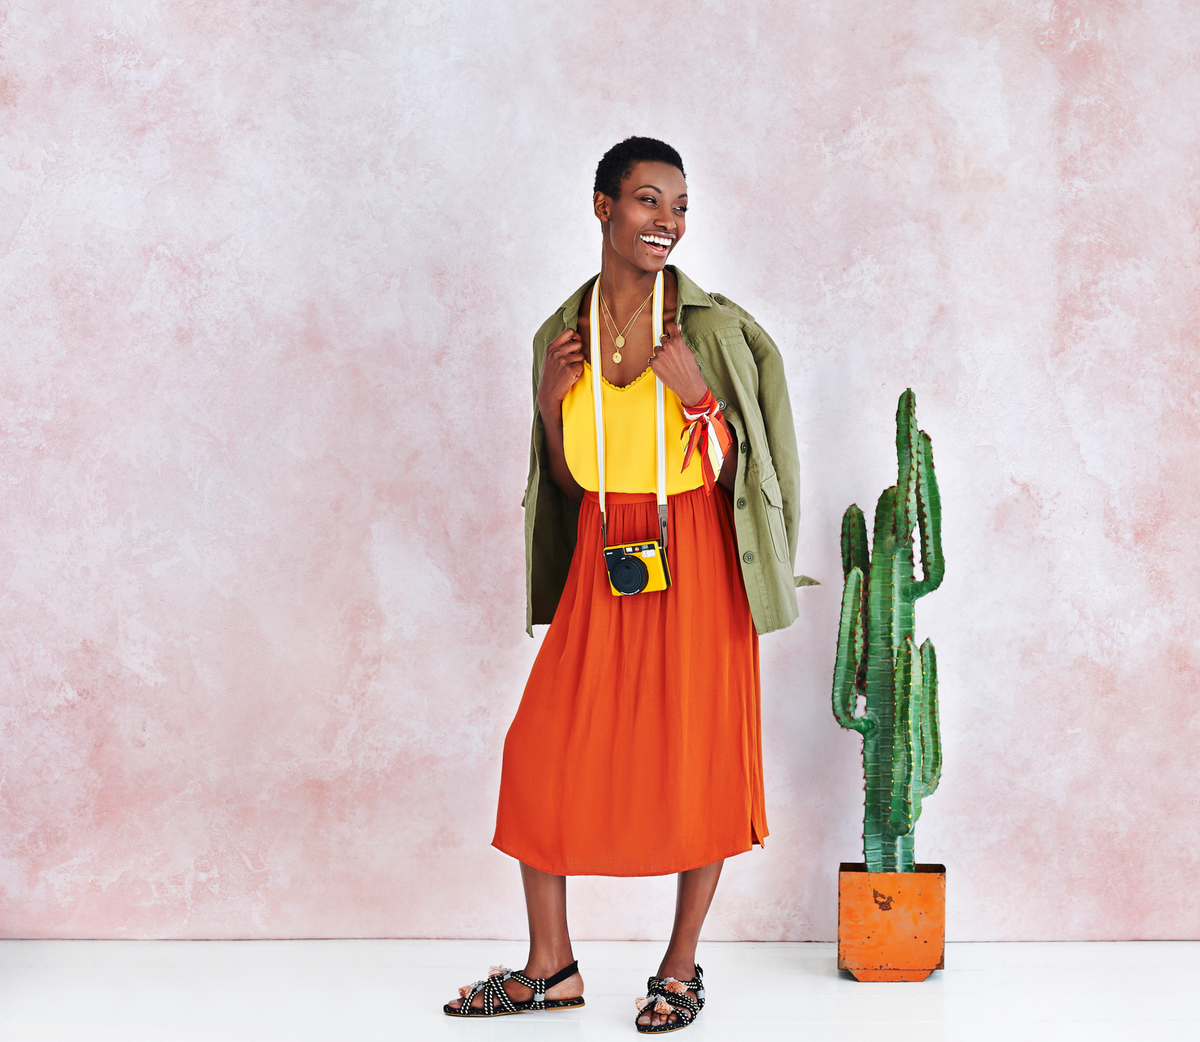 A lady laughing wearing an orange skirt and yellow top with a green khaki shirt over her shoulders and a camera hanging around her neck standing in front of a fabric backdrop printed in a light pink texture with a cactus in a orange metal pot.